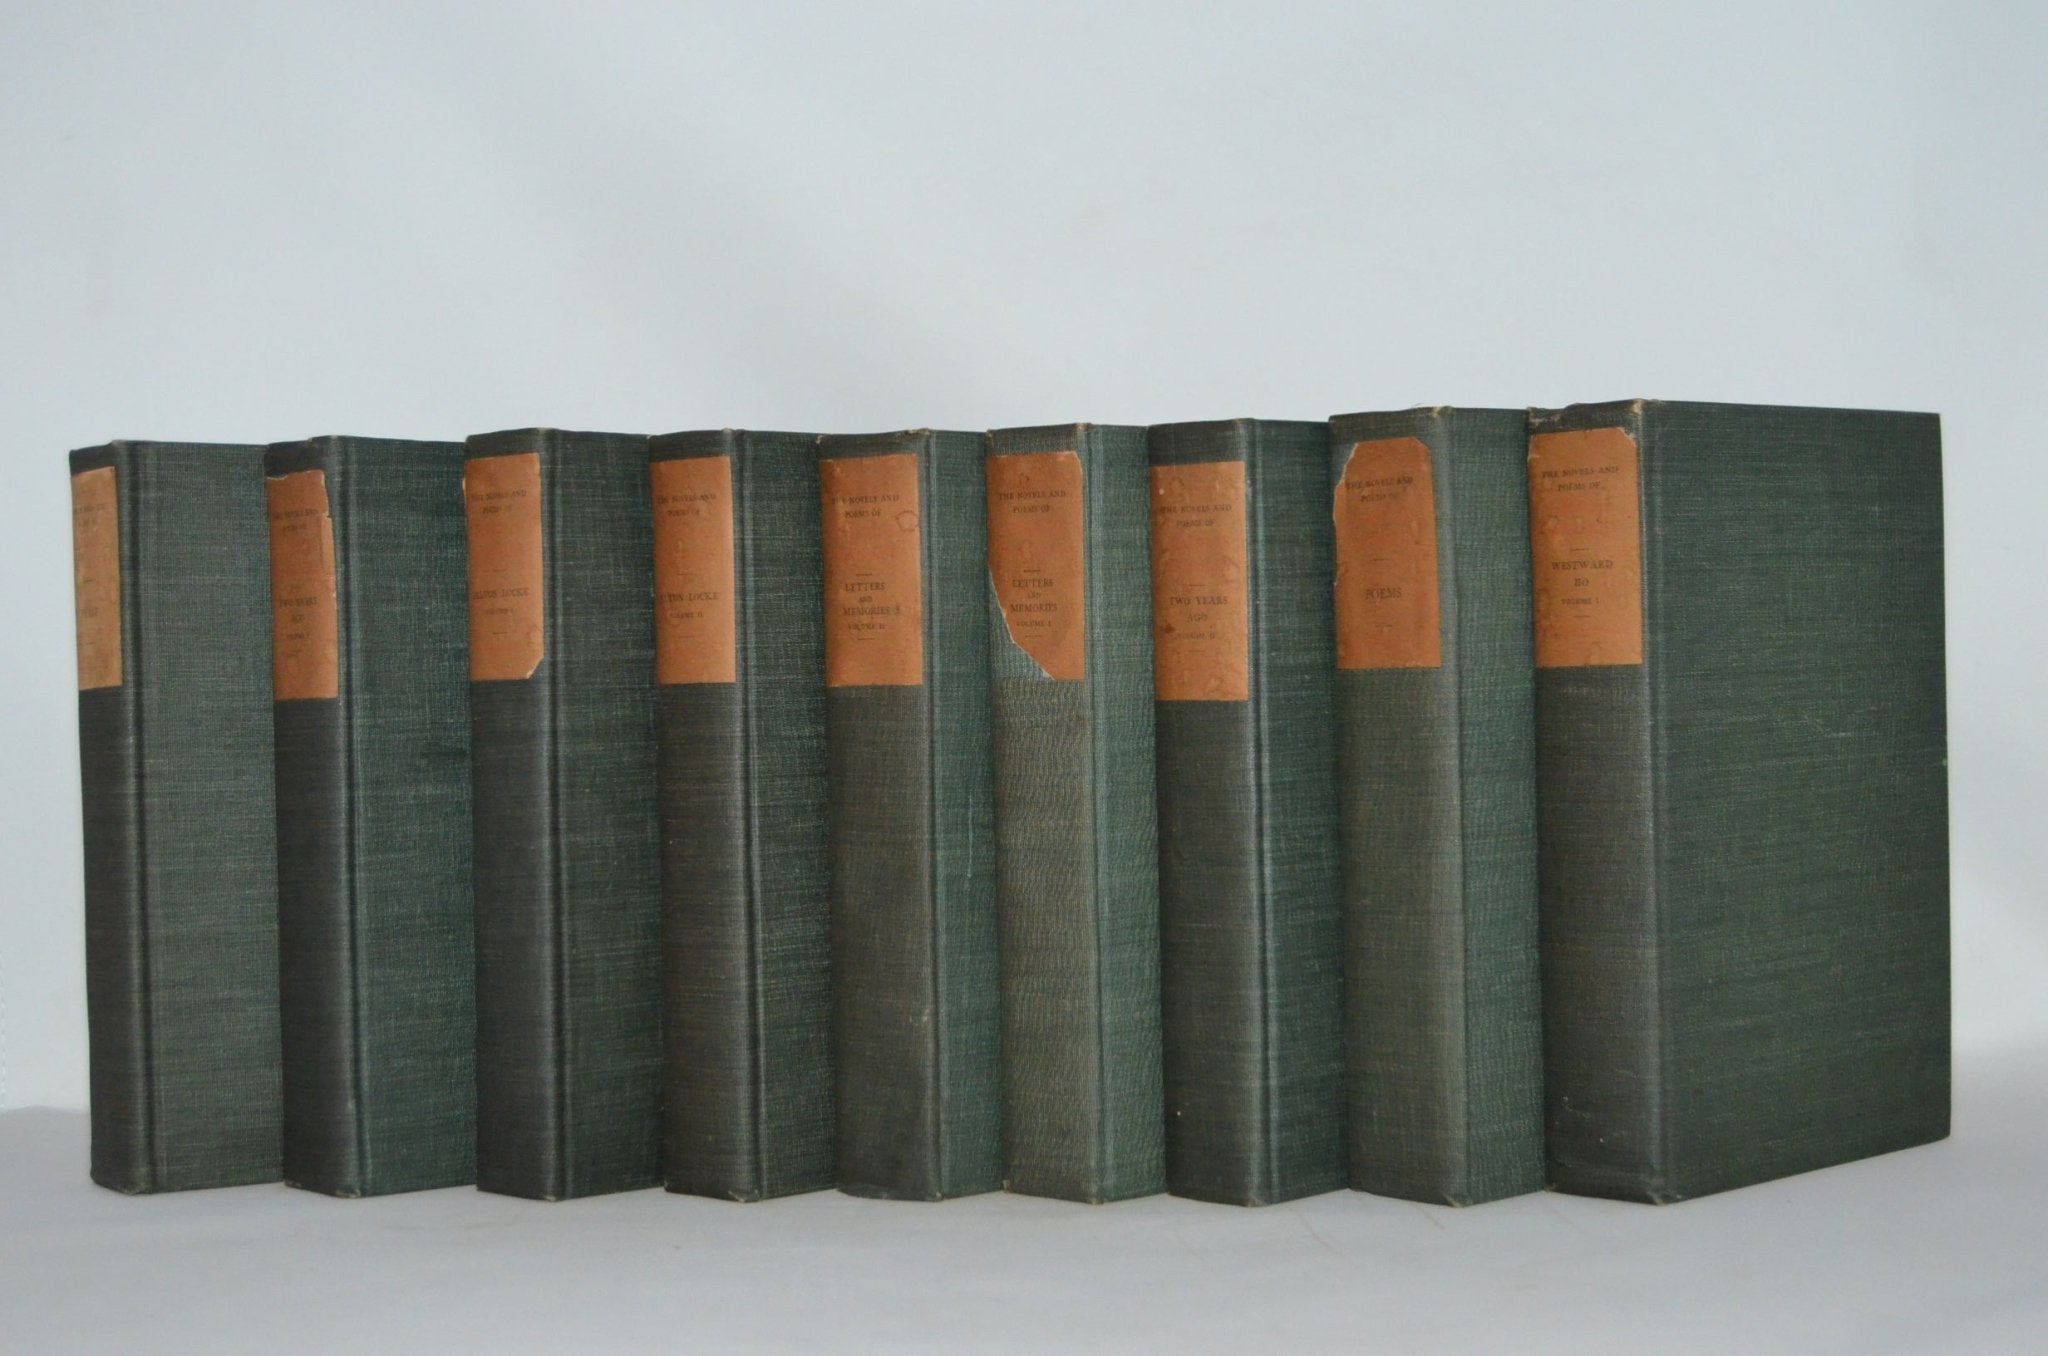 Antique Cloth Bound Book Décor – 1 Foot Forest Green & Brown – Charles Kingsley - Brookfield Books